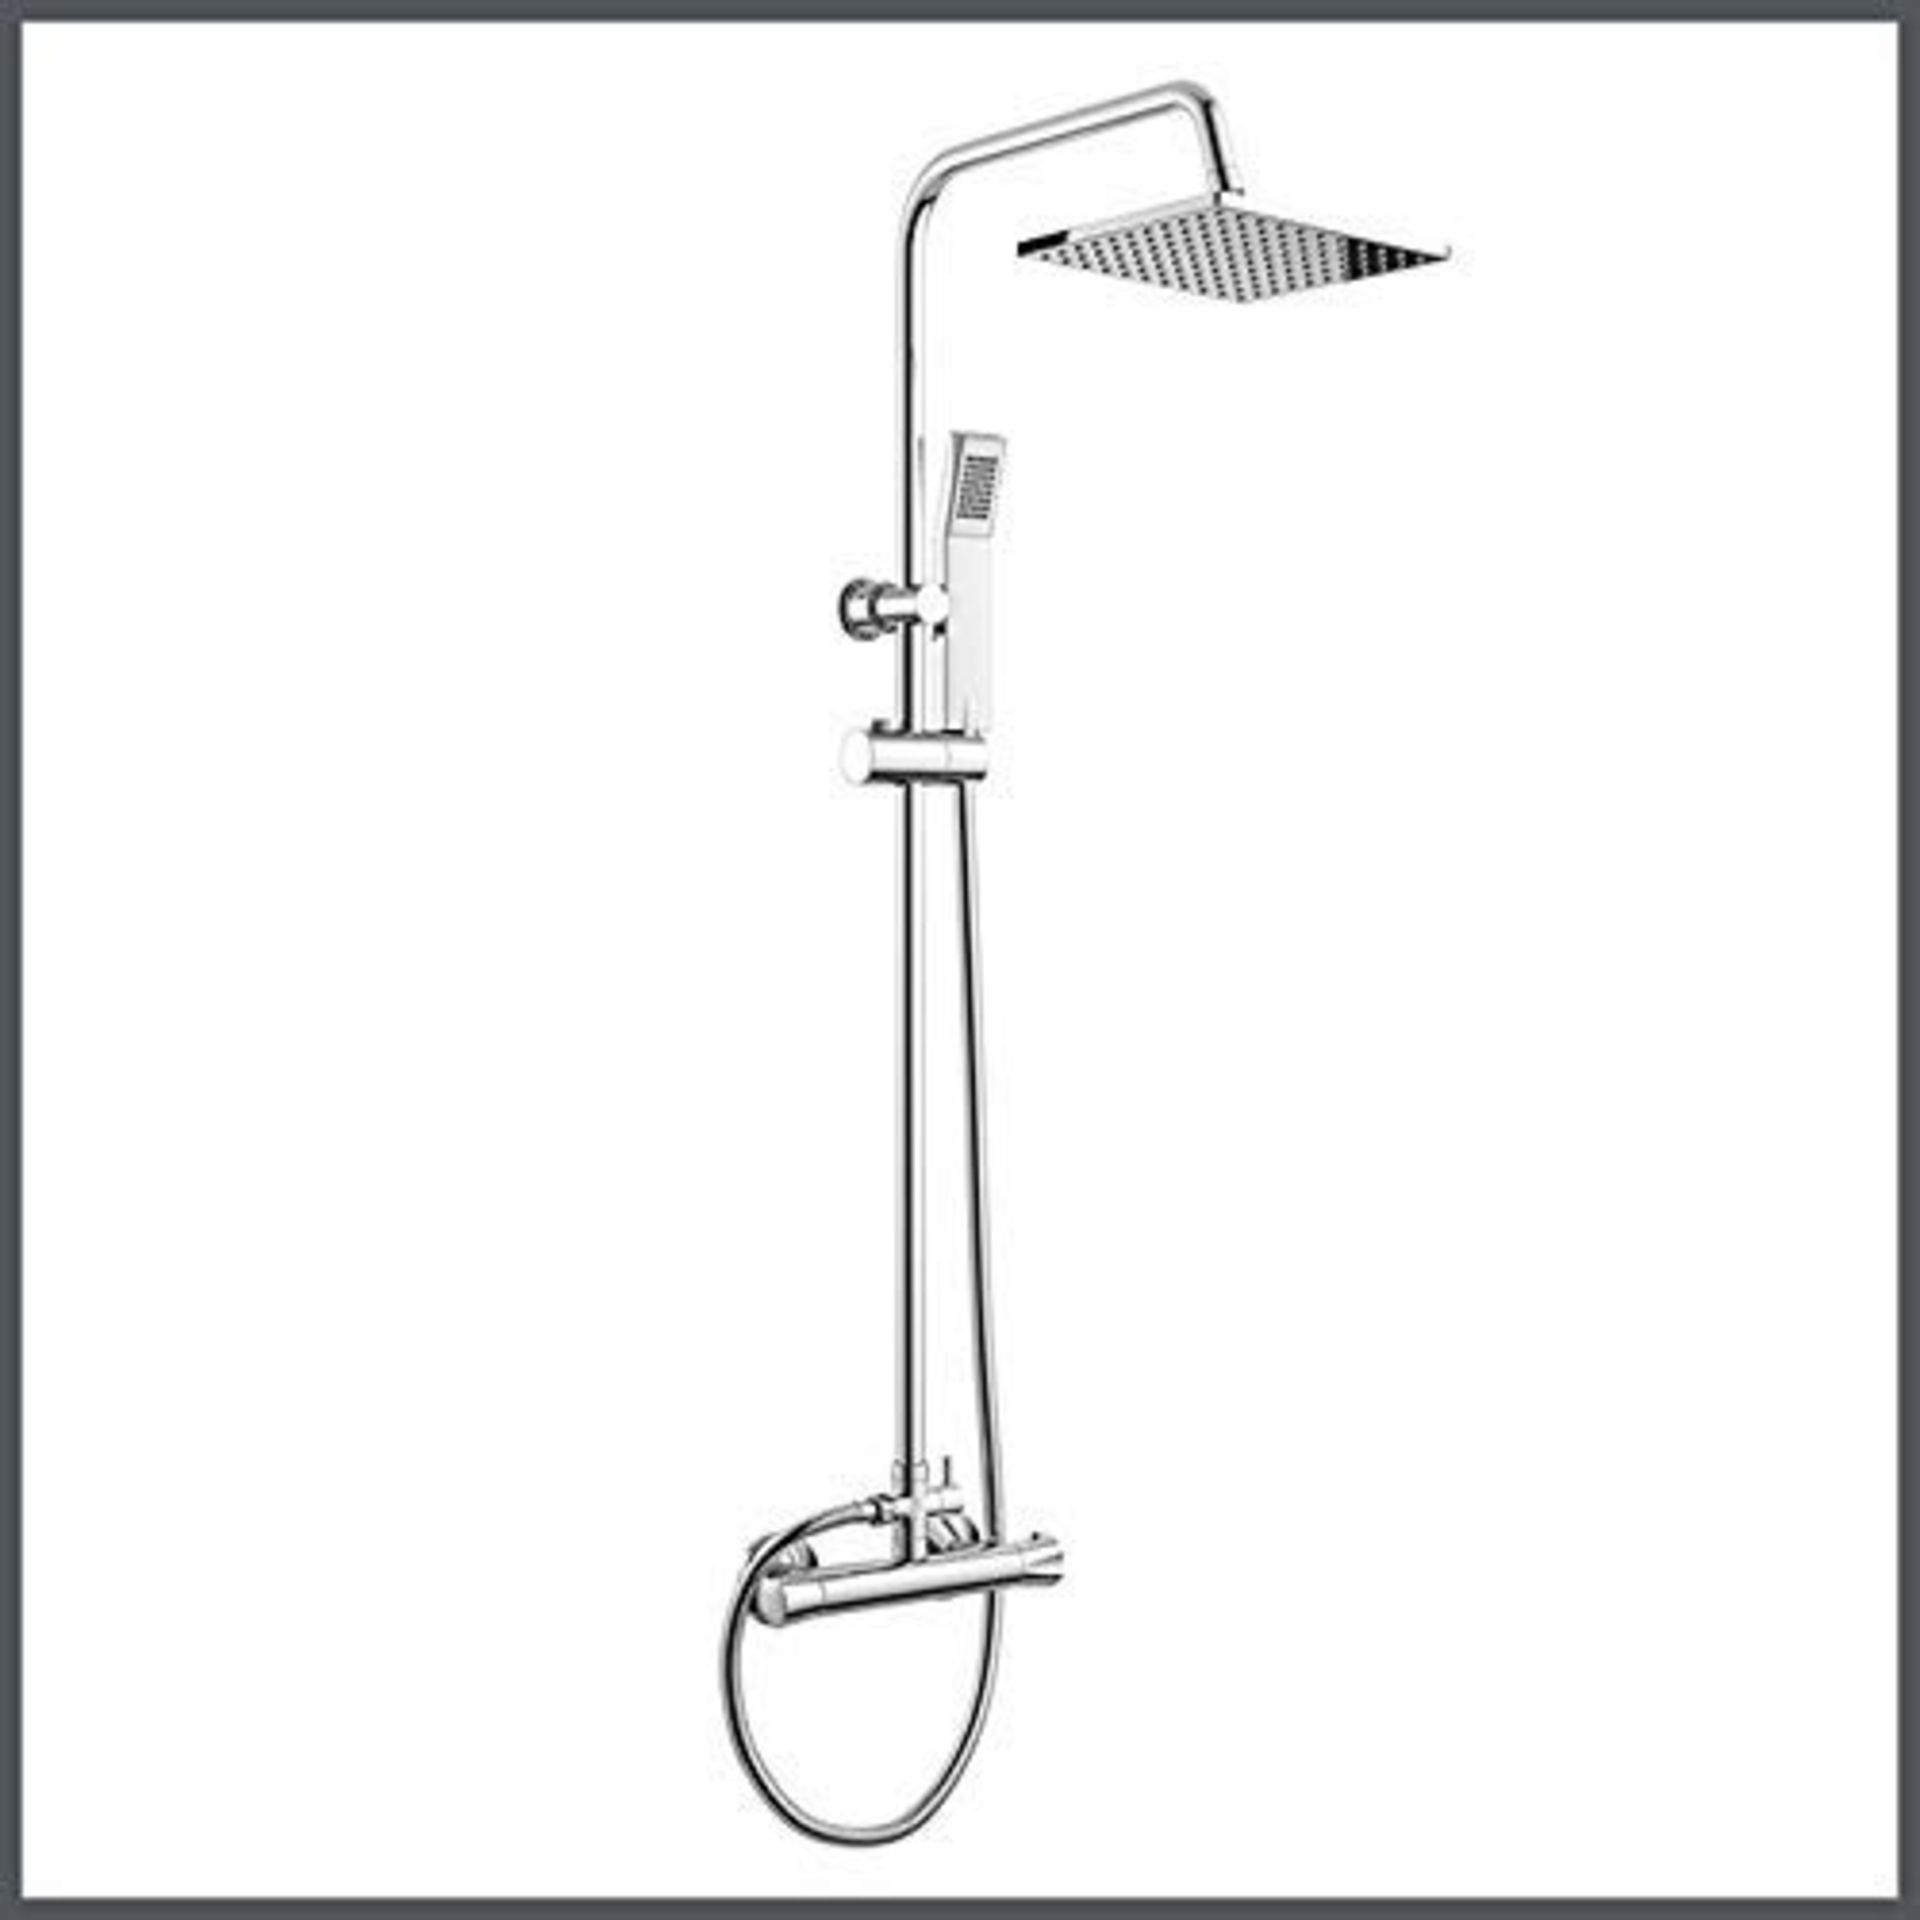 (RC104) Exposed Thermostatic 2-Way Bar Mixer Shower Set Chrome Valve 200mm Square Head + Handhe... - Image 2 of 2